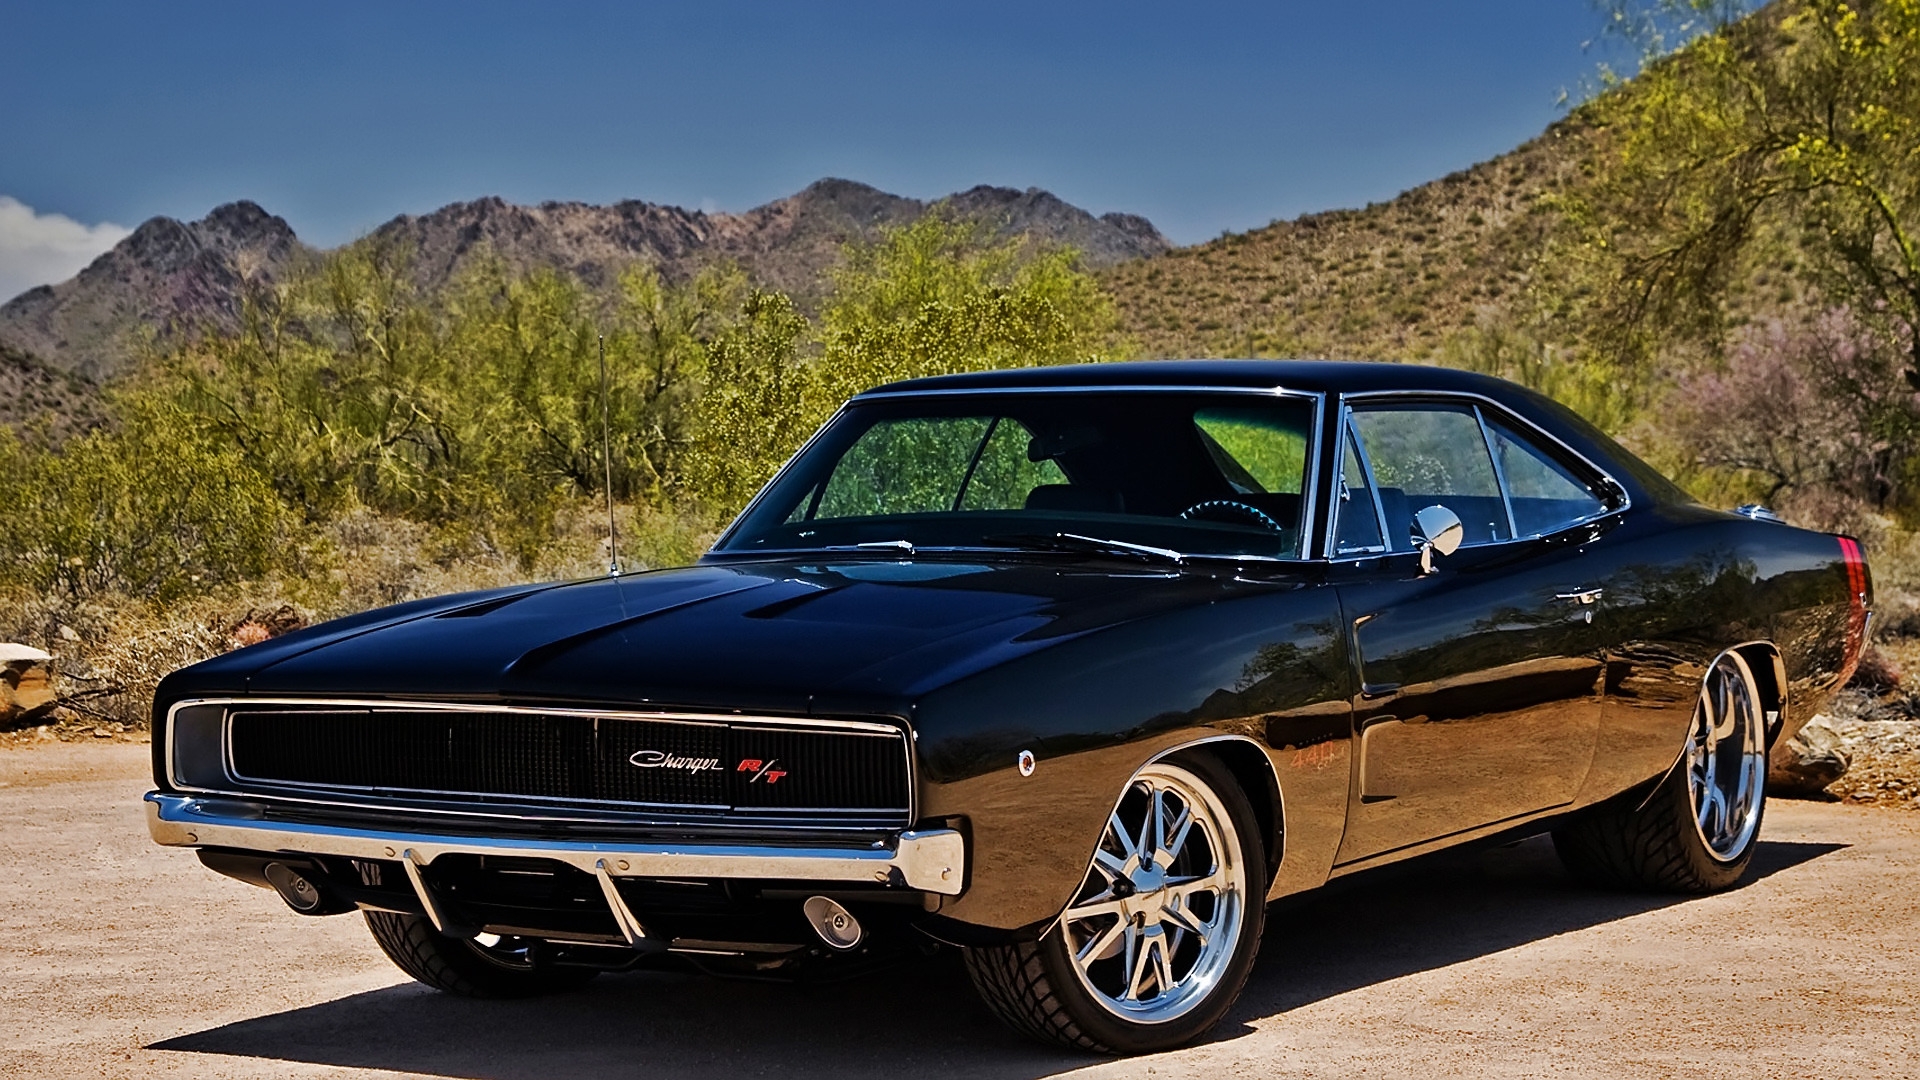 Black Dodge Charger RT for 1920 x 1080 HDTV 1080p resolution